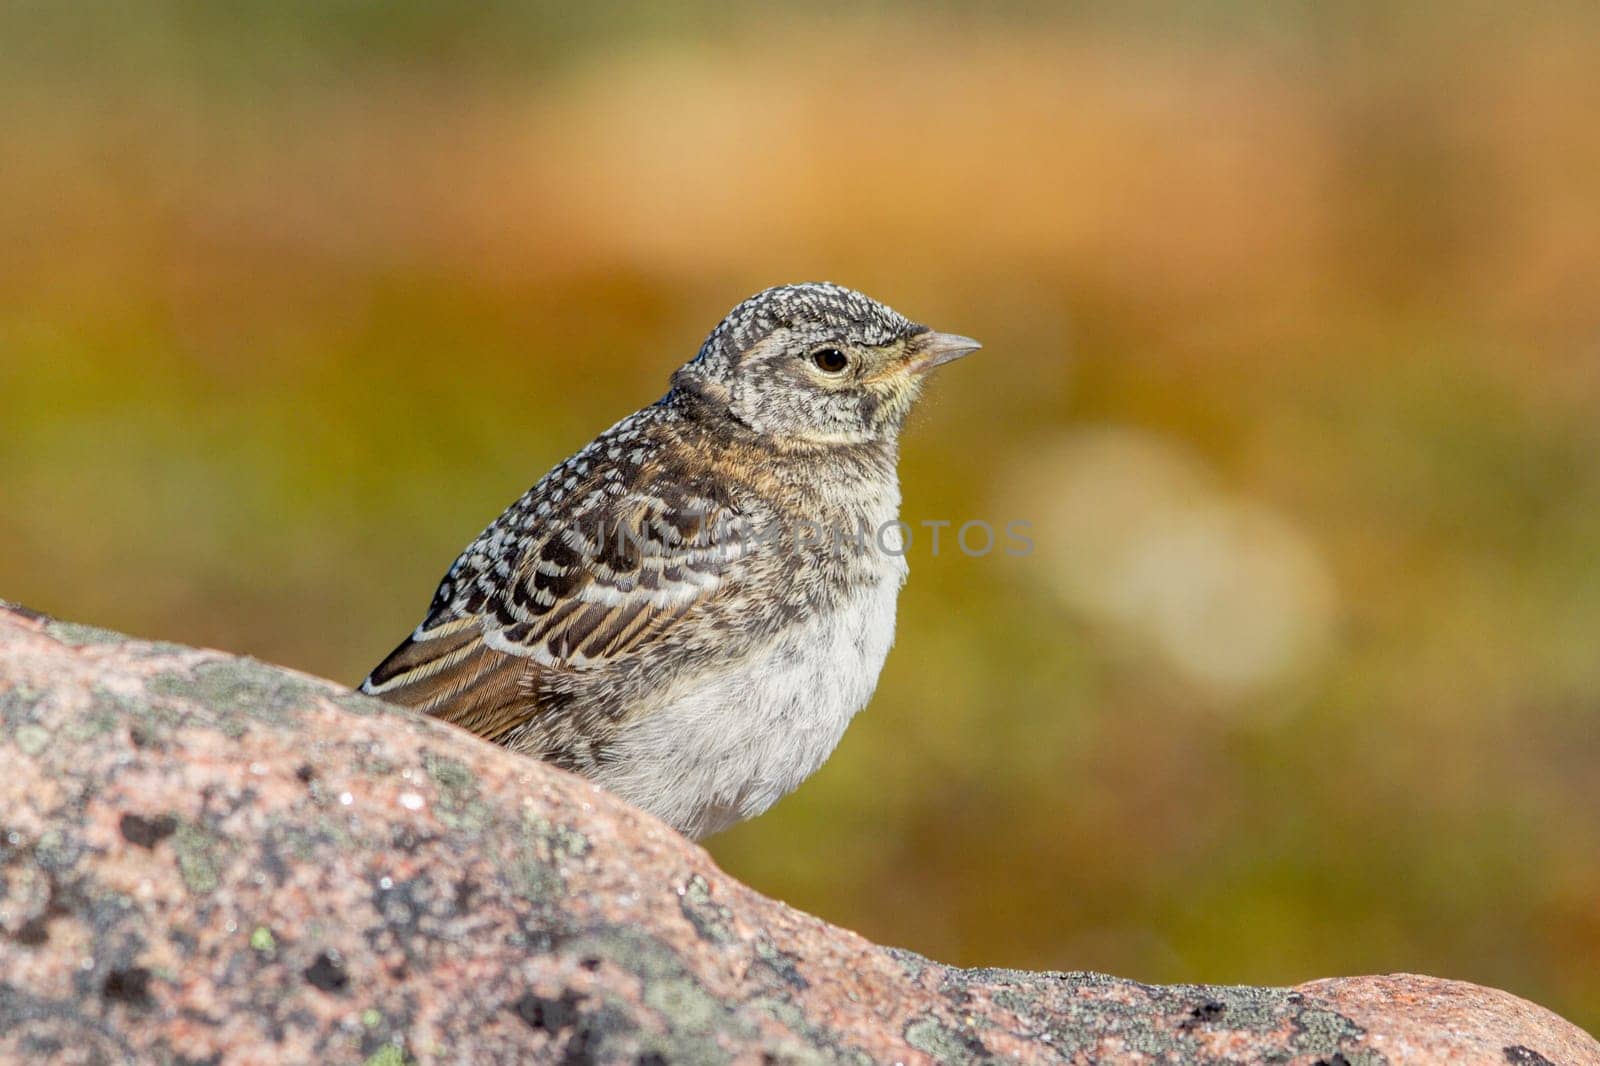 Immature horned lark or shore lark standing on a rock in Canada's arctic by Granchinho